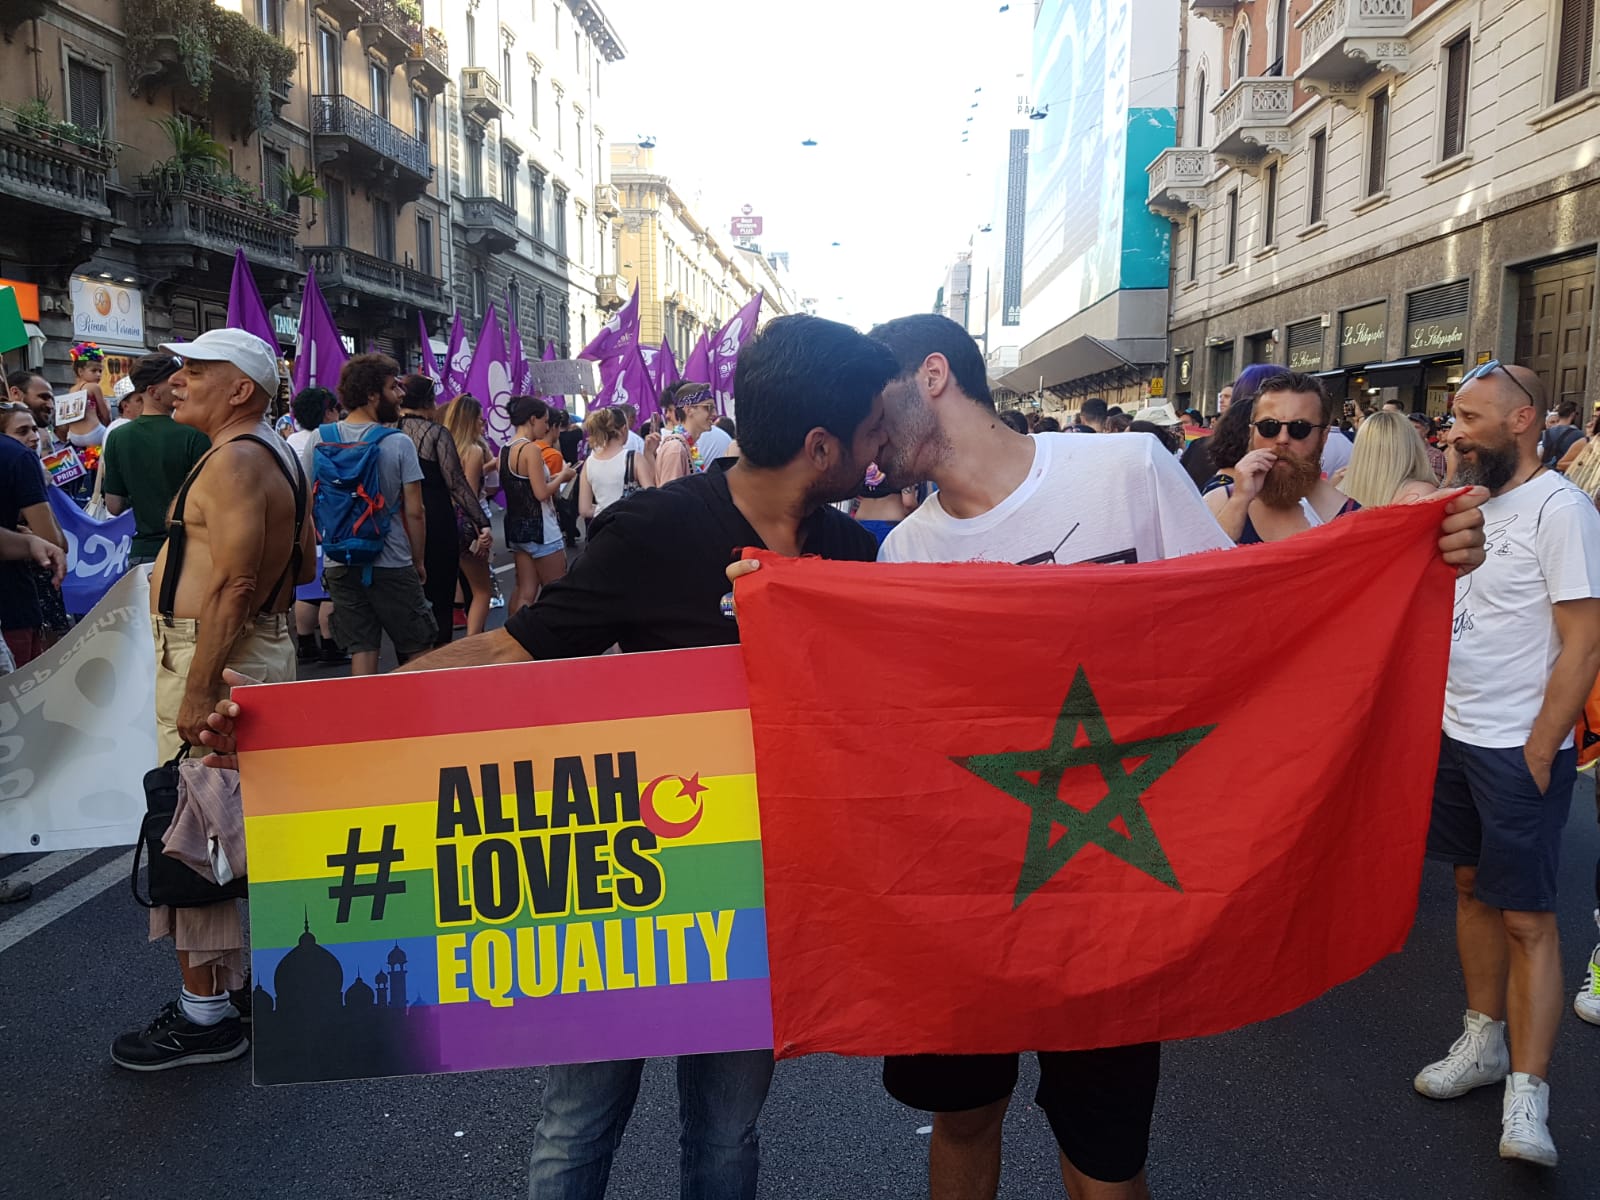 Gay Morocco  LGBTQ+ Travel Guide, Morocco Gay Rights & Safety Tips